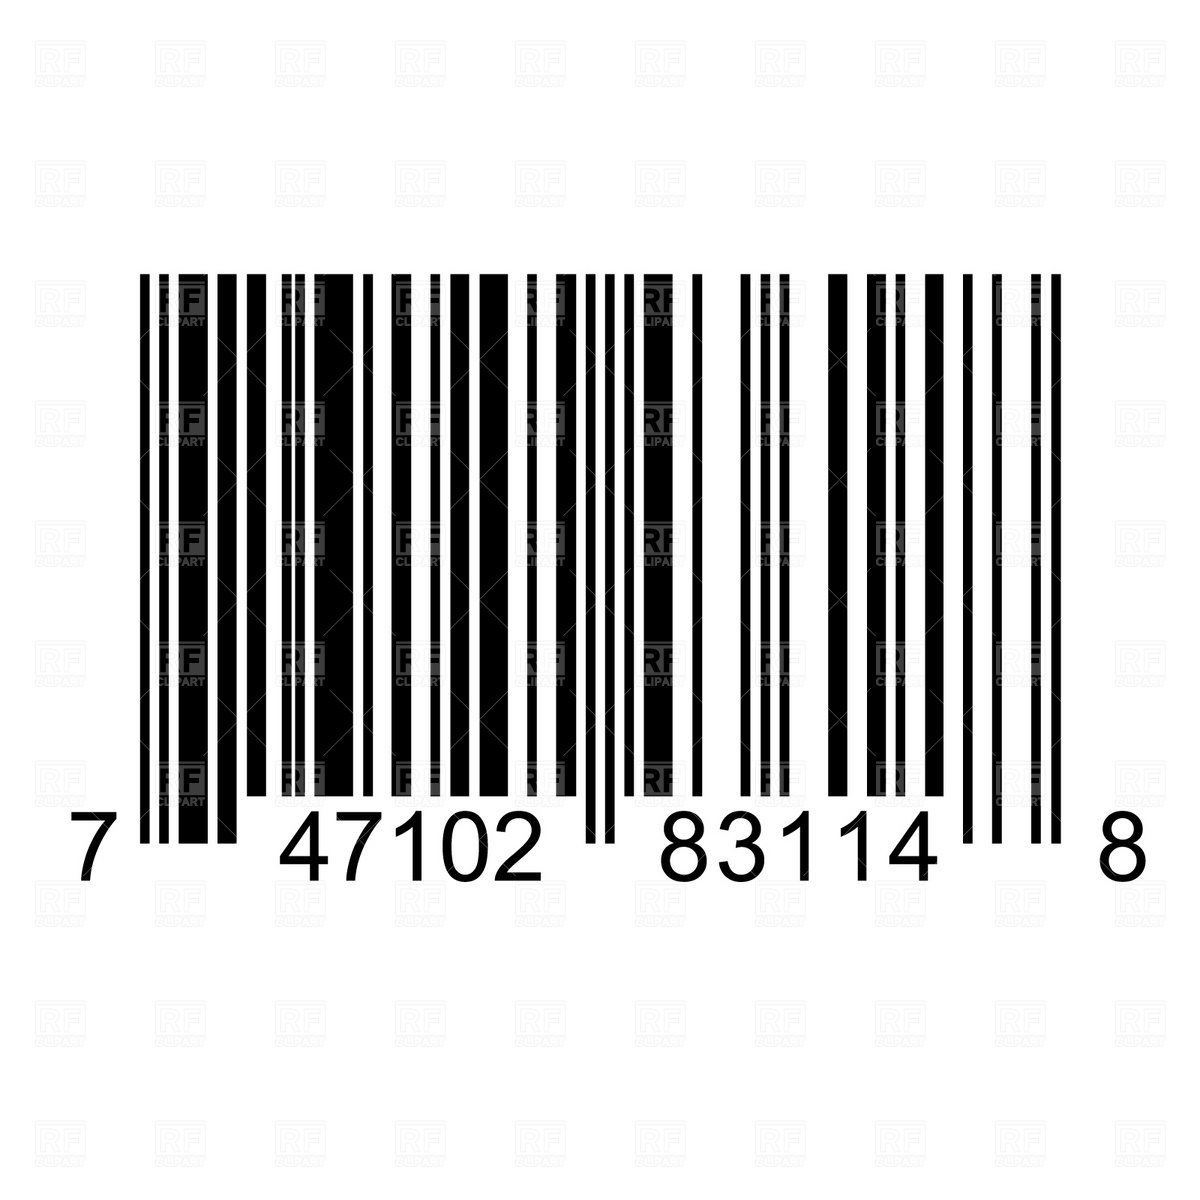 Barcode Download Royalty Free Vector Clipart  Eps